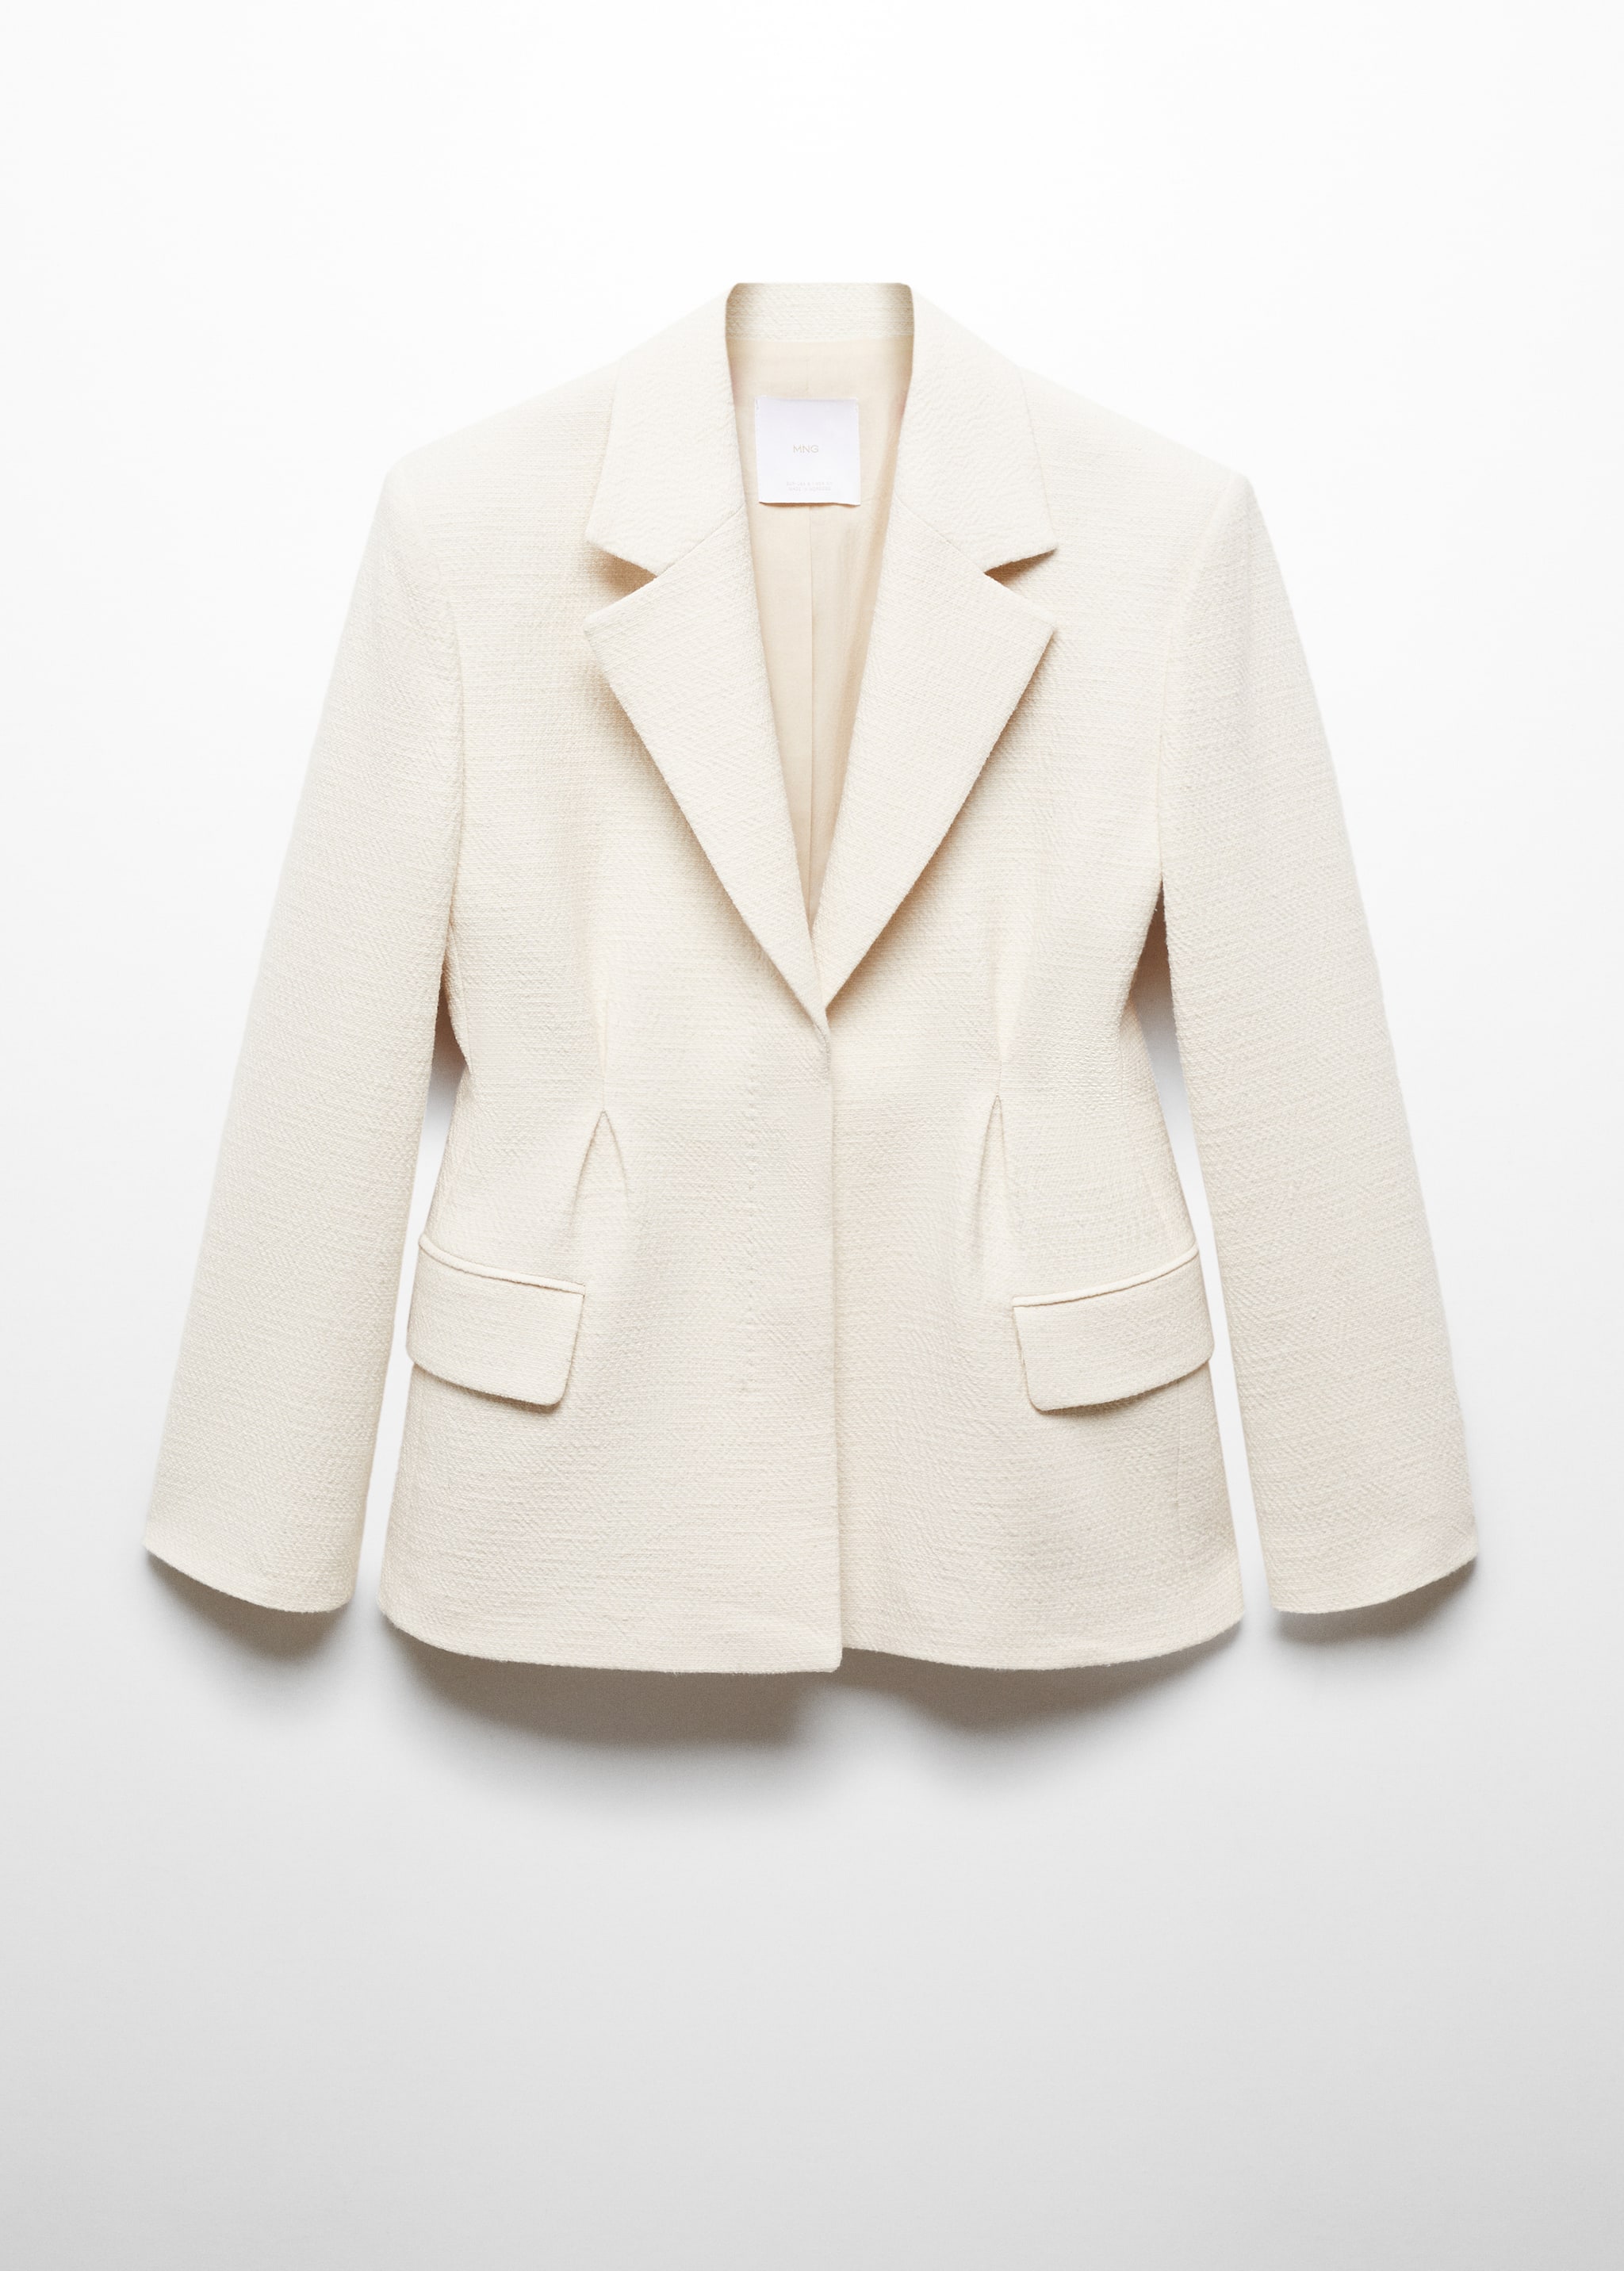 Textured blazer with darted detail - Article without model